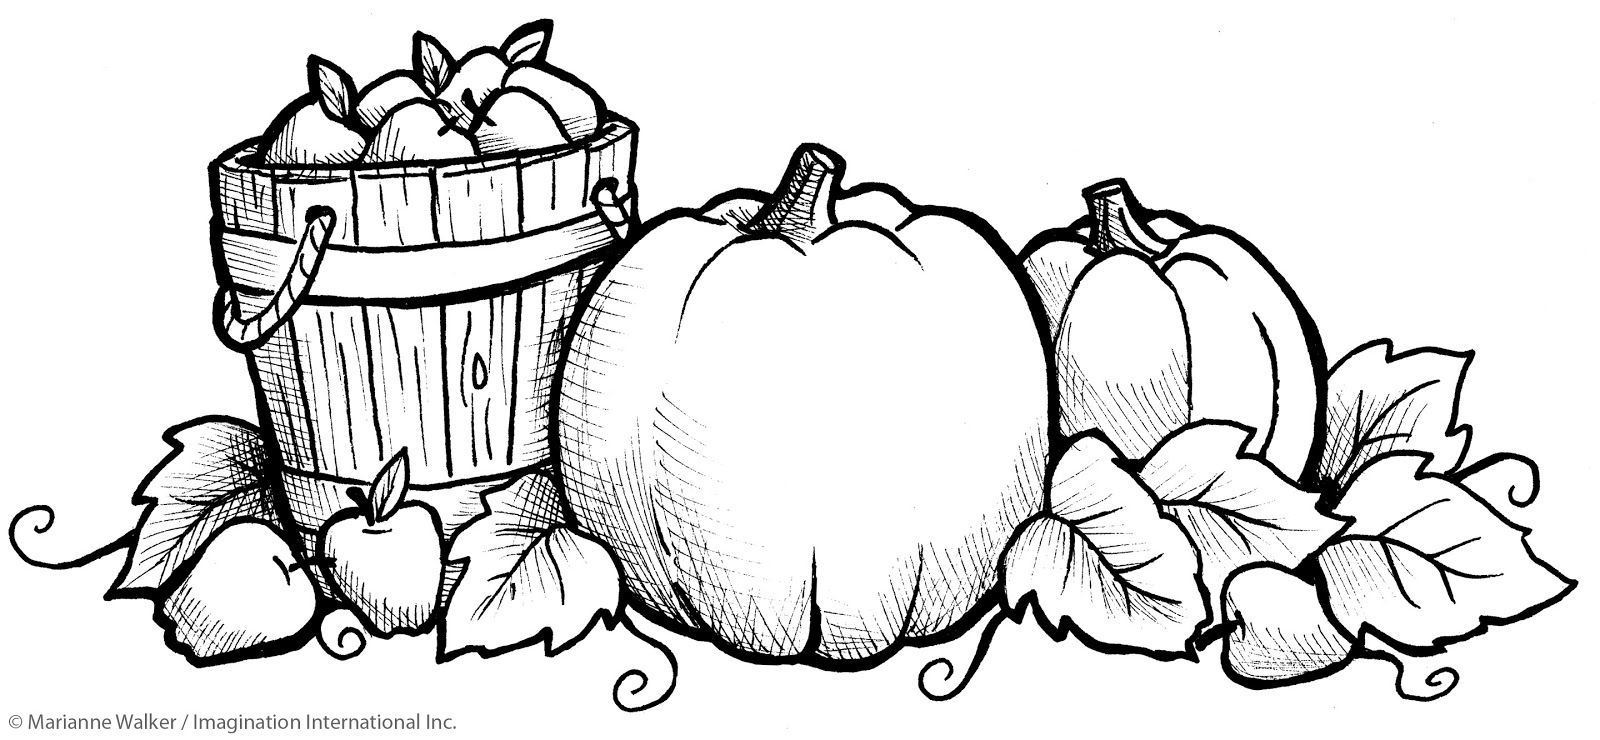 pumpkin coloring pages free printable pumpkins coloring pages to celebrate thanksgiving learn coloring free printable pumpkin pages 